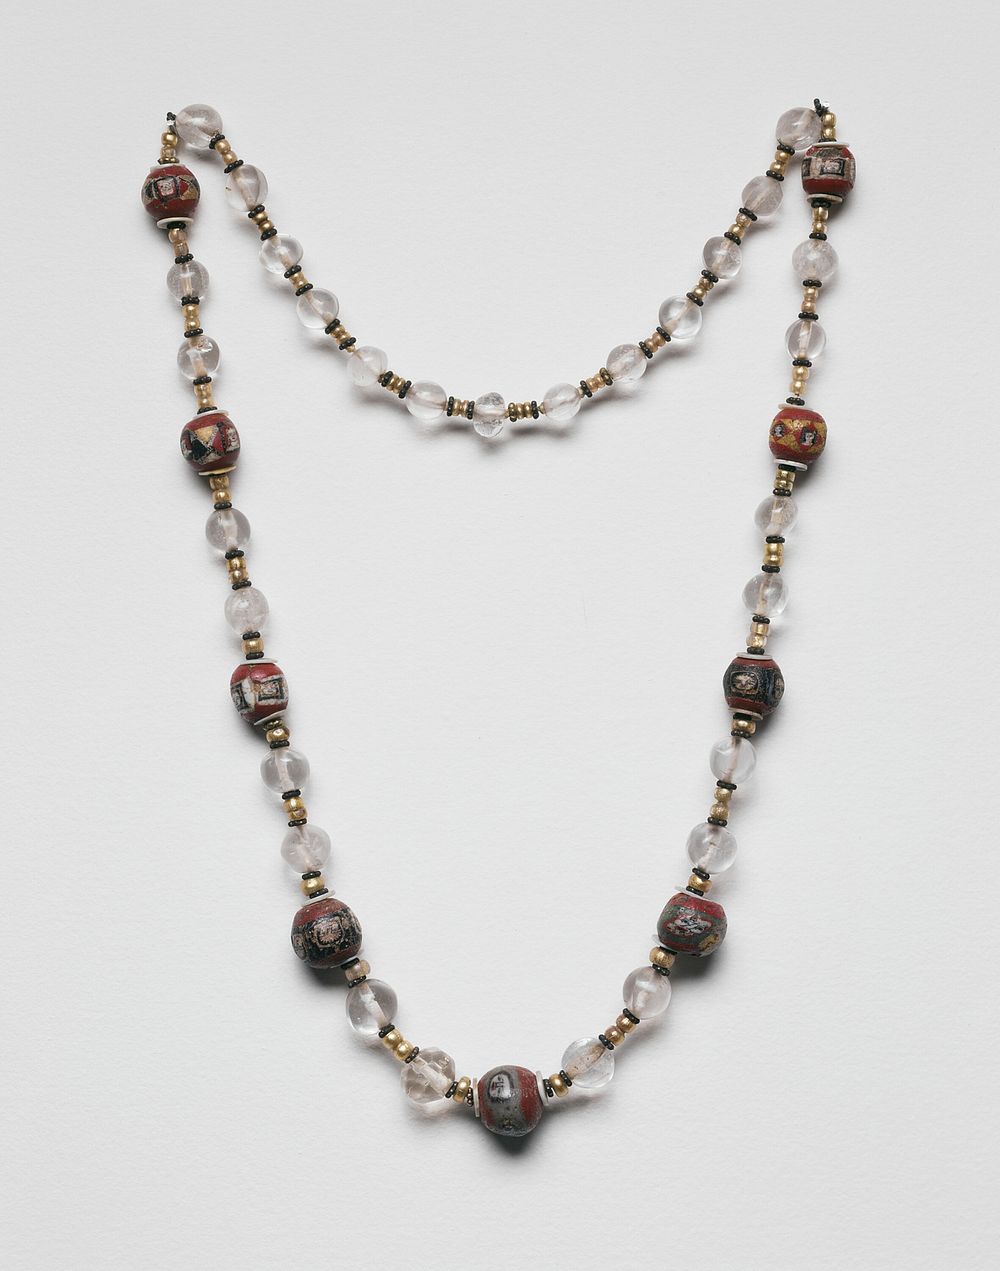 Necklace by Ancient Roman